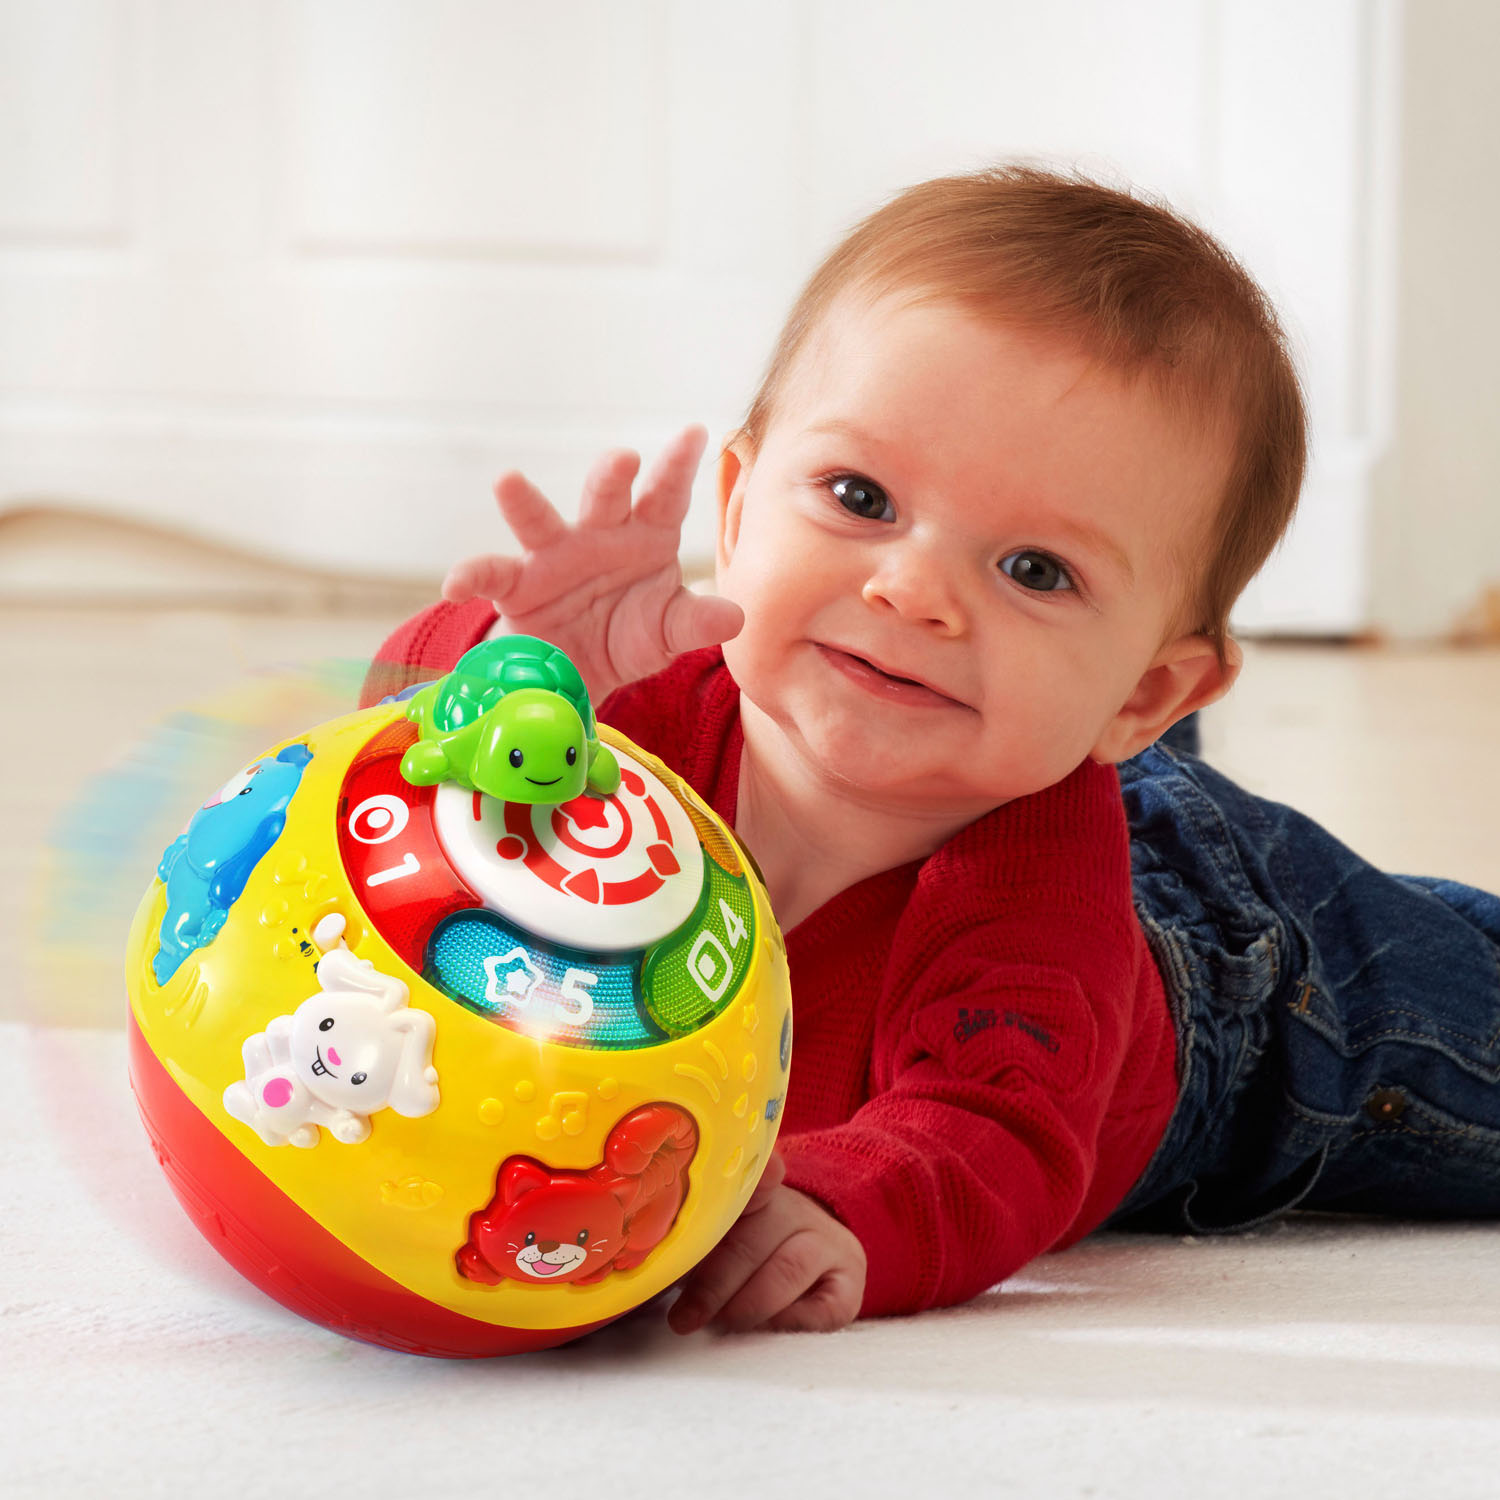 VTech Wiggle and Crawl Ball for Babies and Toddlers, Encourages Motor Skills, Teaches Shapes & Colors - image 5 of 10